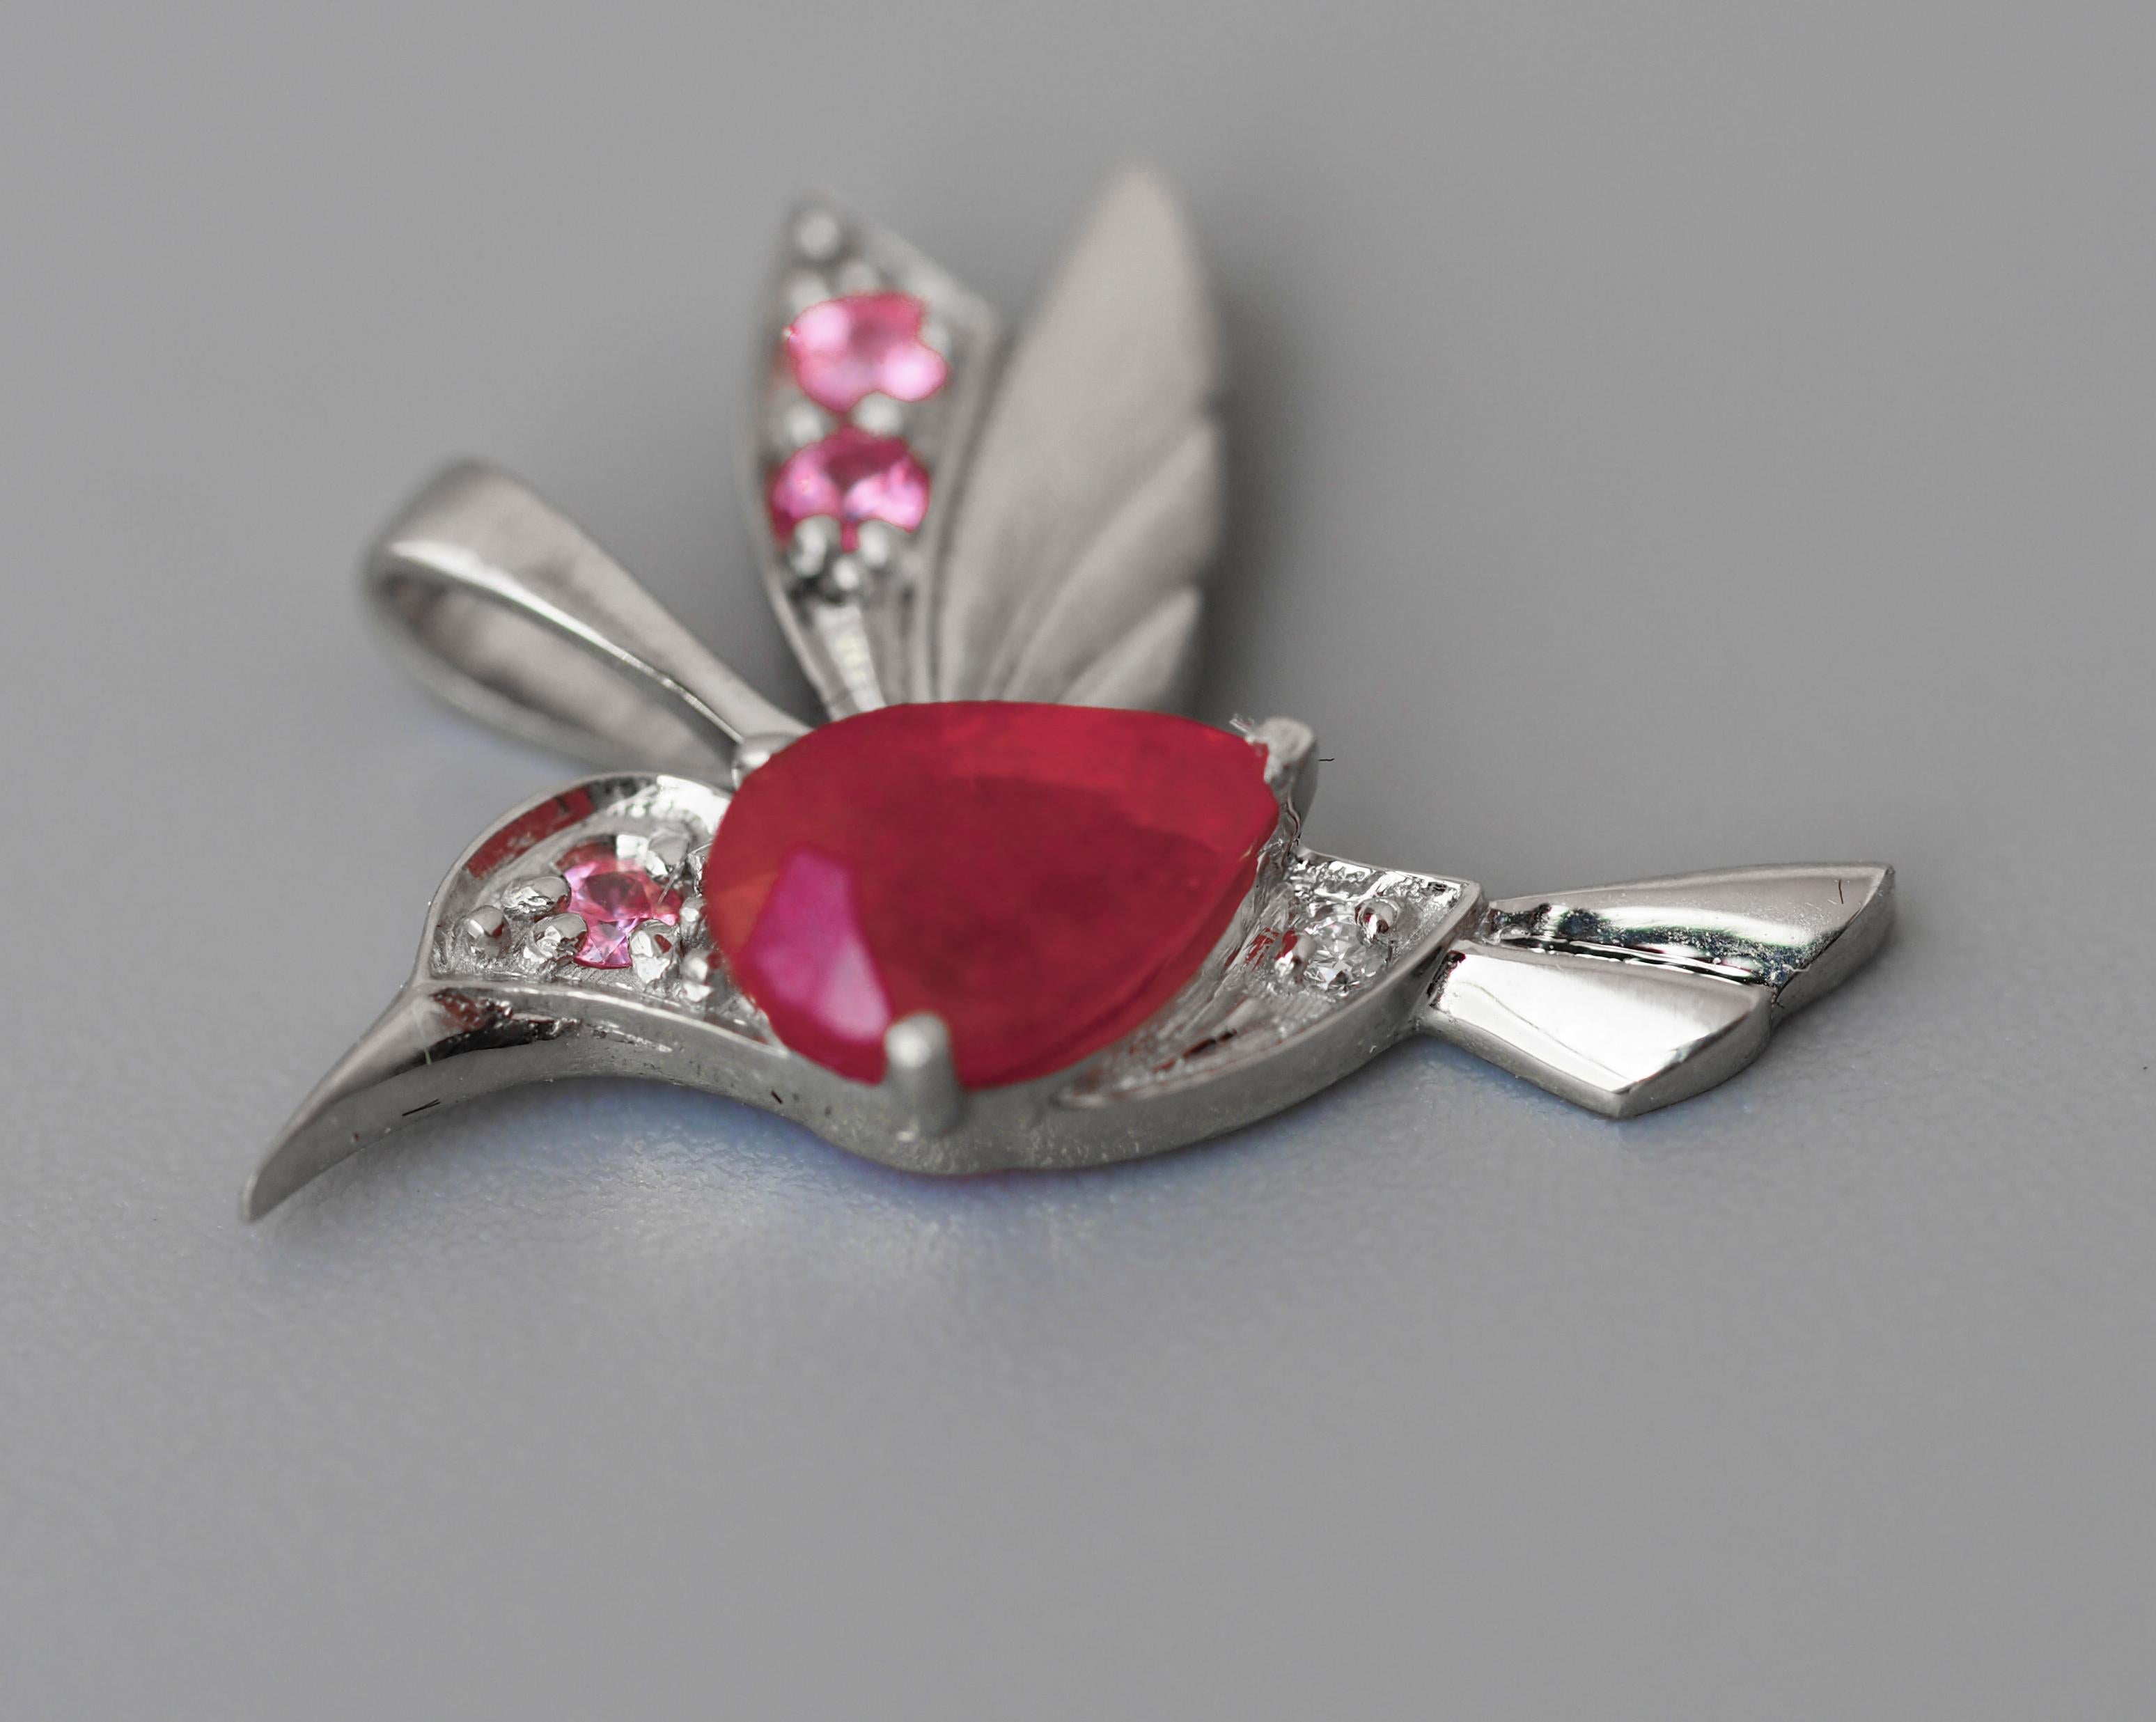 14 kt solid gold bird pendant with natural ruby, sapphires and diamond.
Weight: 0.9 g.
Size: 12 x 16.6 mm.
Set with ruby: color - red
Pear cut, 0.70 ct in total (6 x 4 mm size)
Clarity: Transparent with inclusions
3 sapphires: 2.2 mm each (0.15 ct),